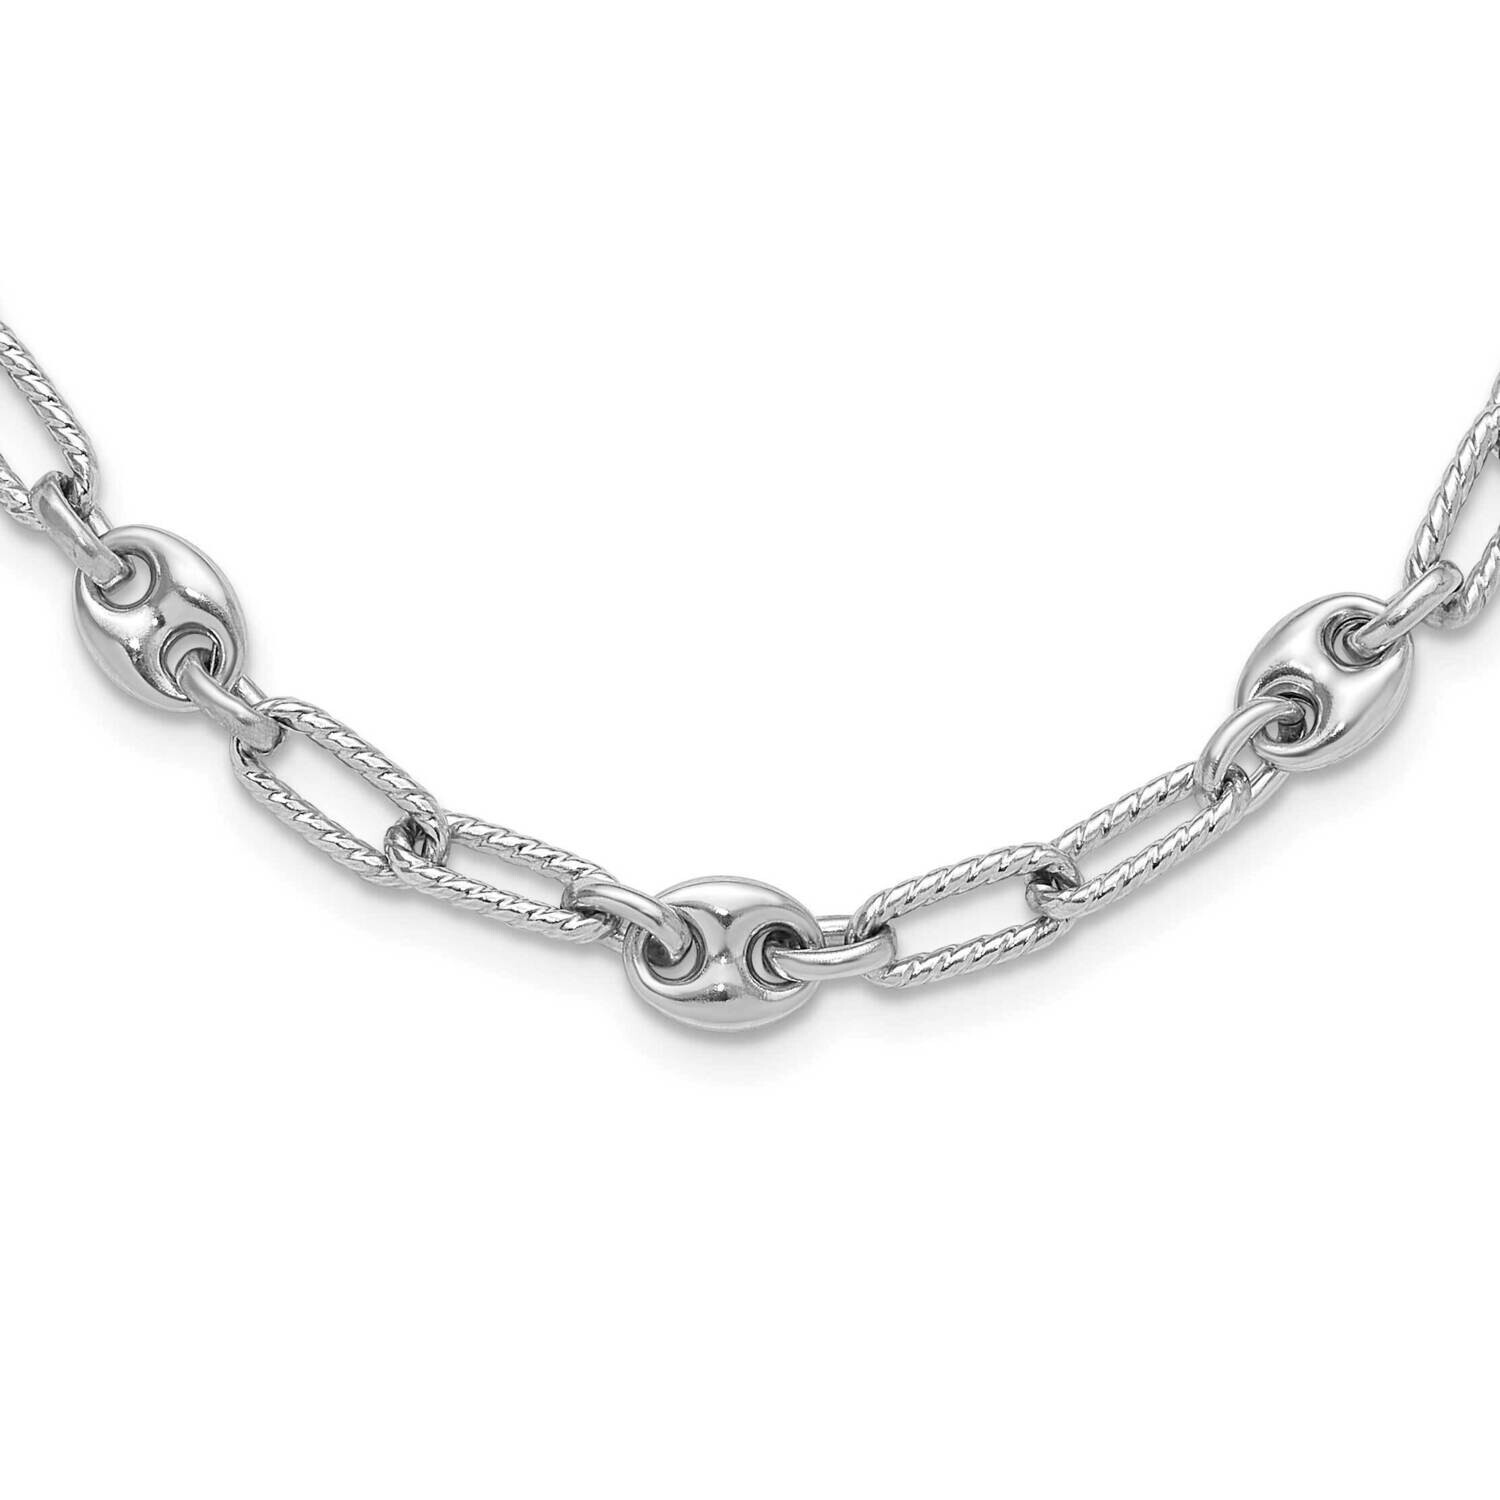 16 1 Inch Extension Fancy Link Necklace Sterling Silver Rhodium-Plated QG6502-16